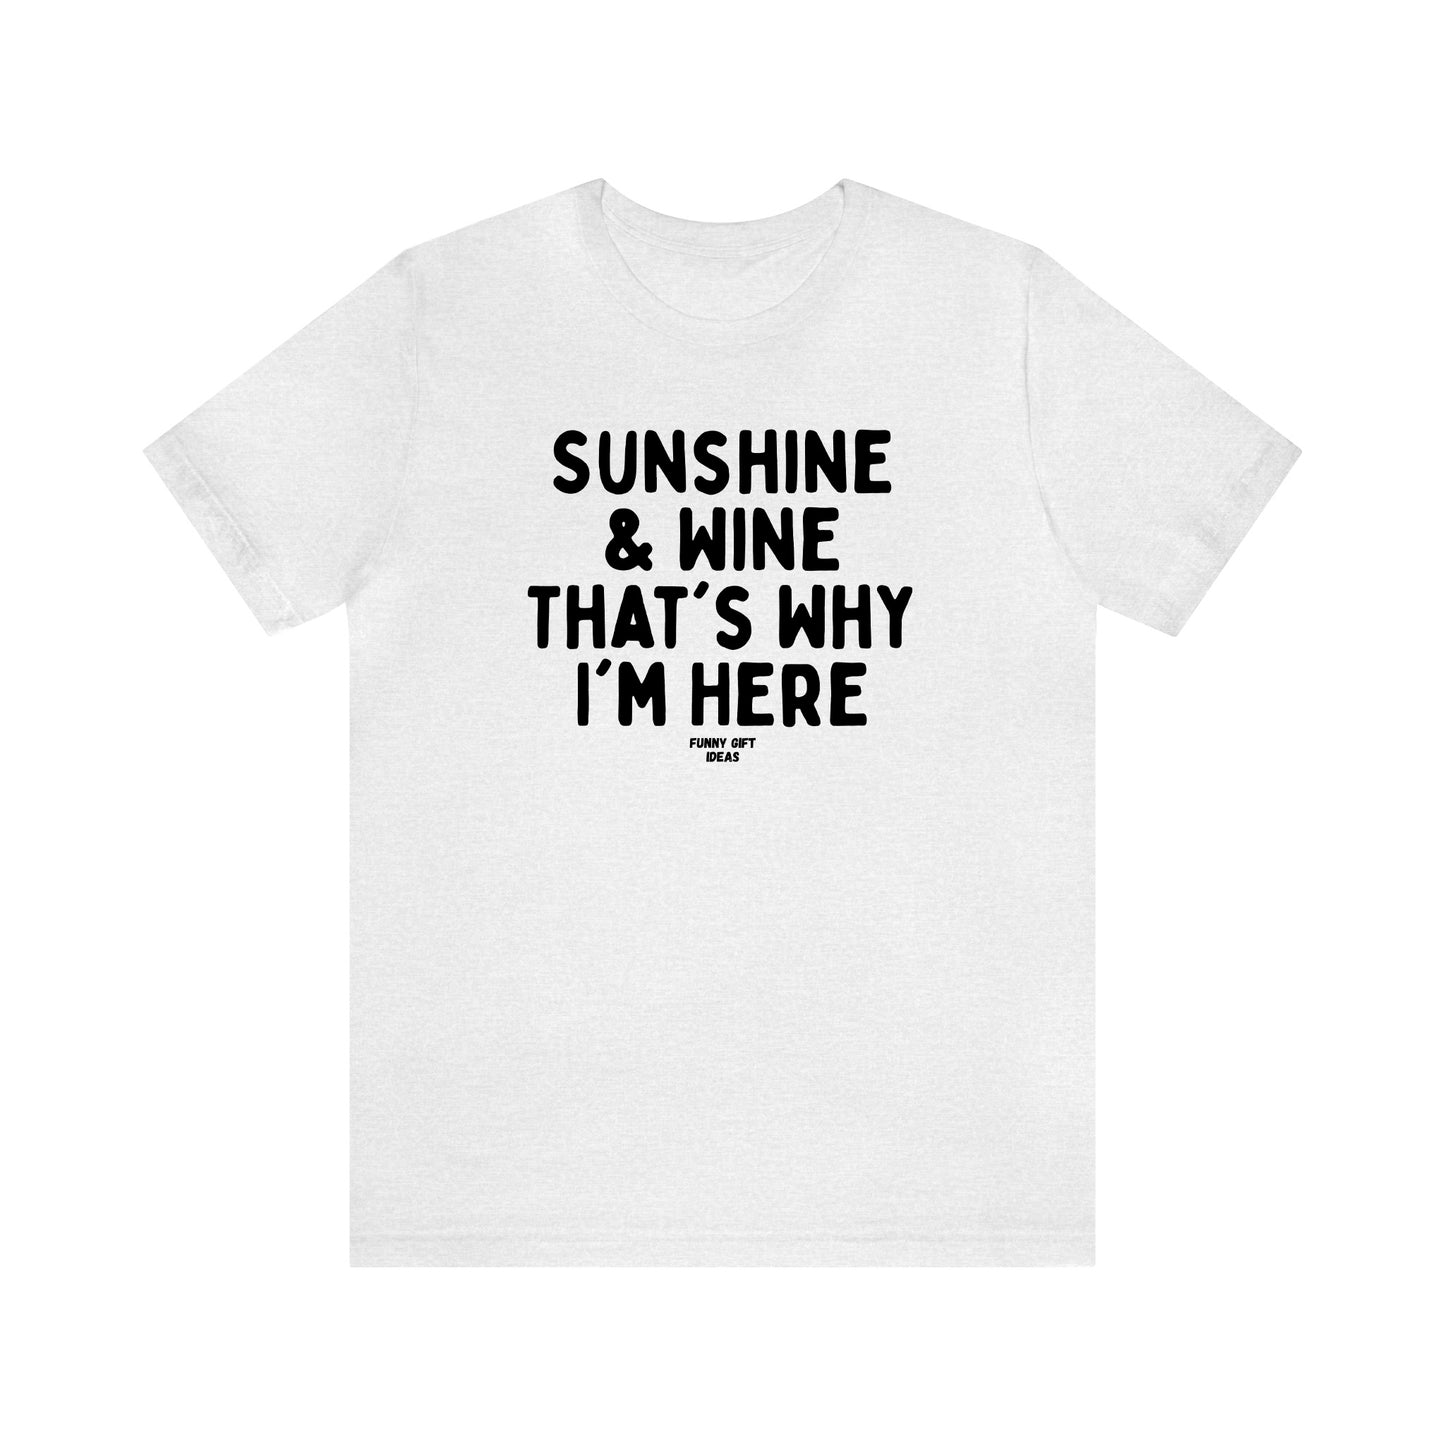 Funny Shirts for Women - Sunshine & Wine That's Why I'm Here - Women's T Shirts